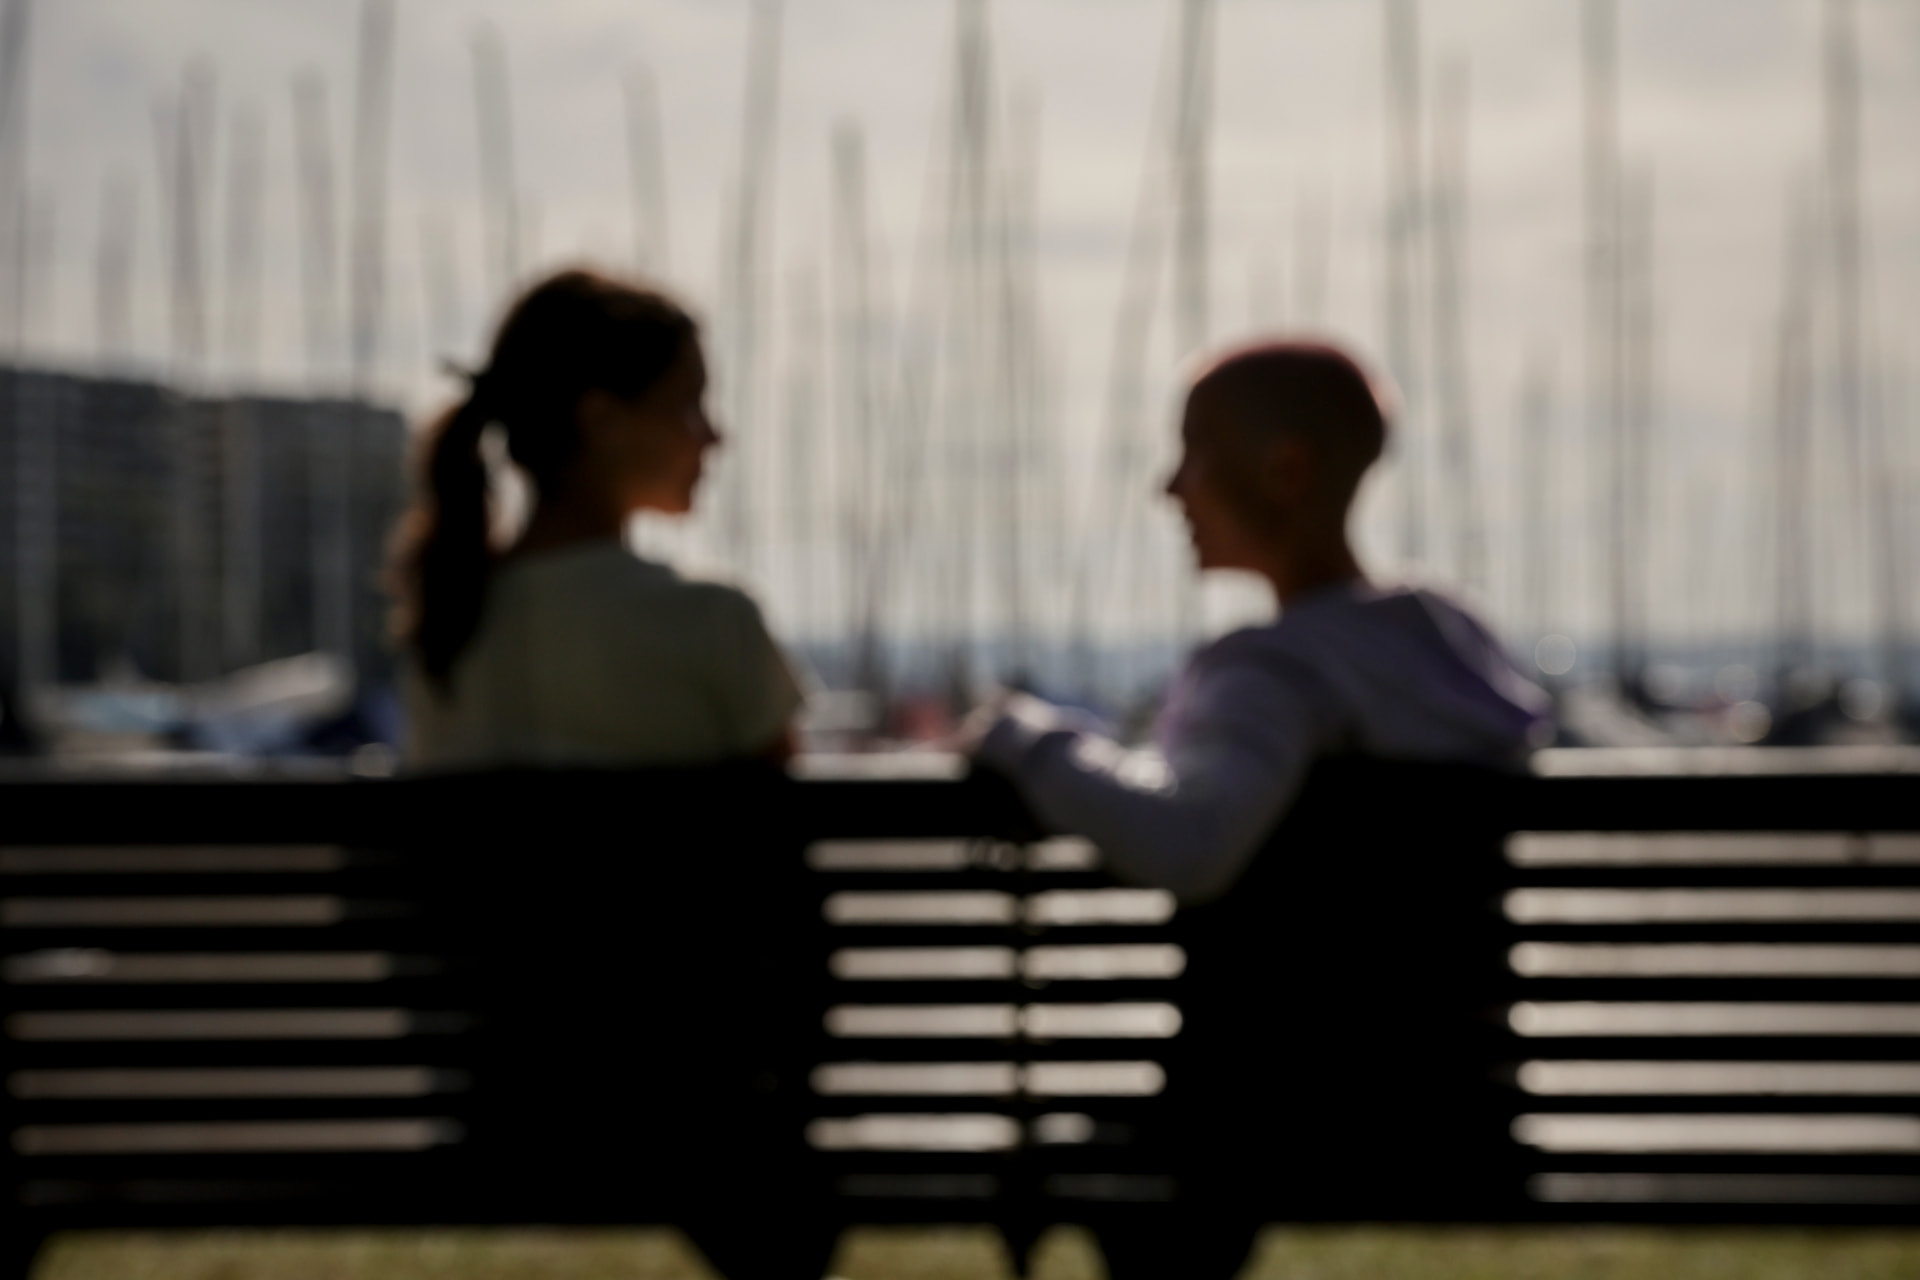 Blurred silhouettes of two people sitting on bench talking